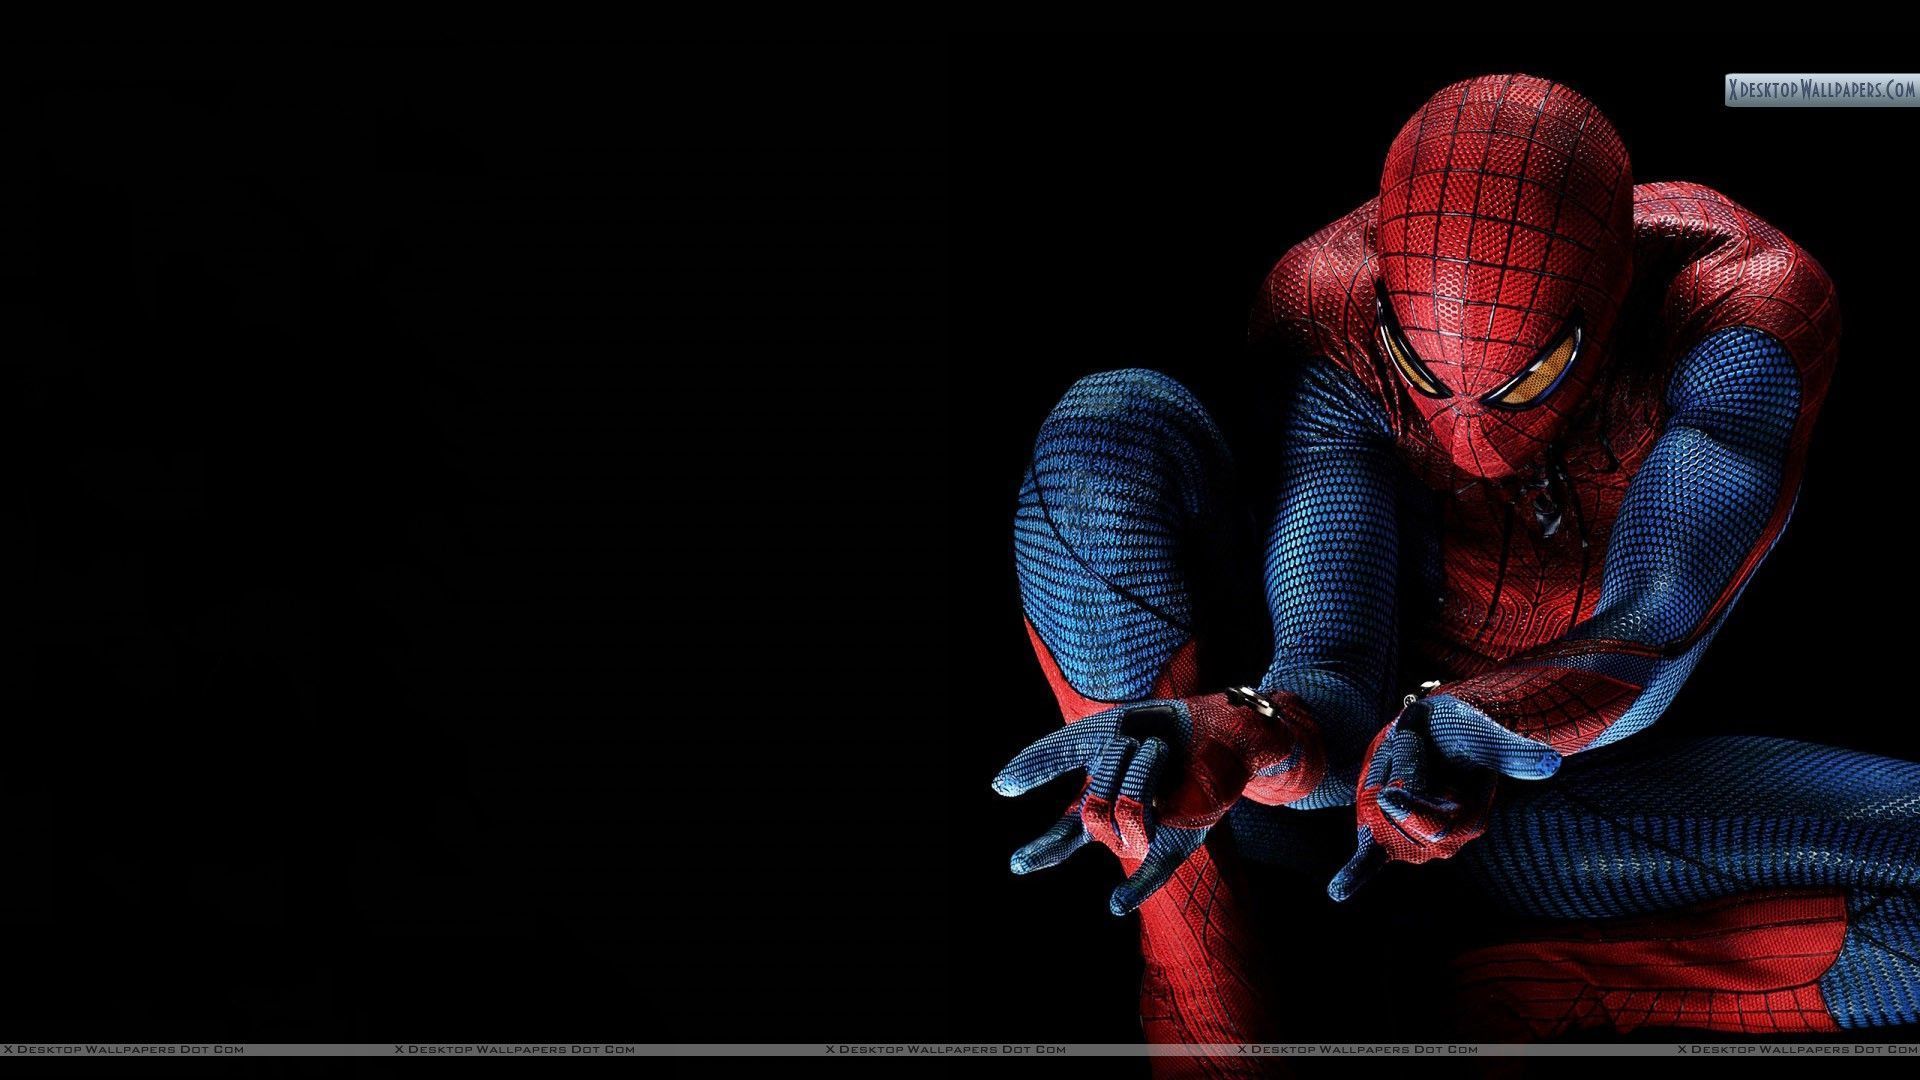 The Amazing Spider Man Wallpapers, Photos & Images in HD